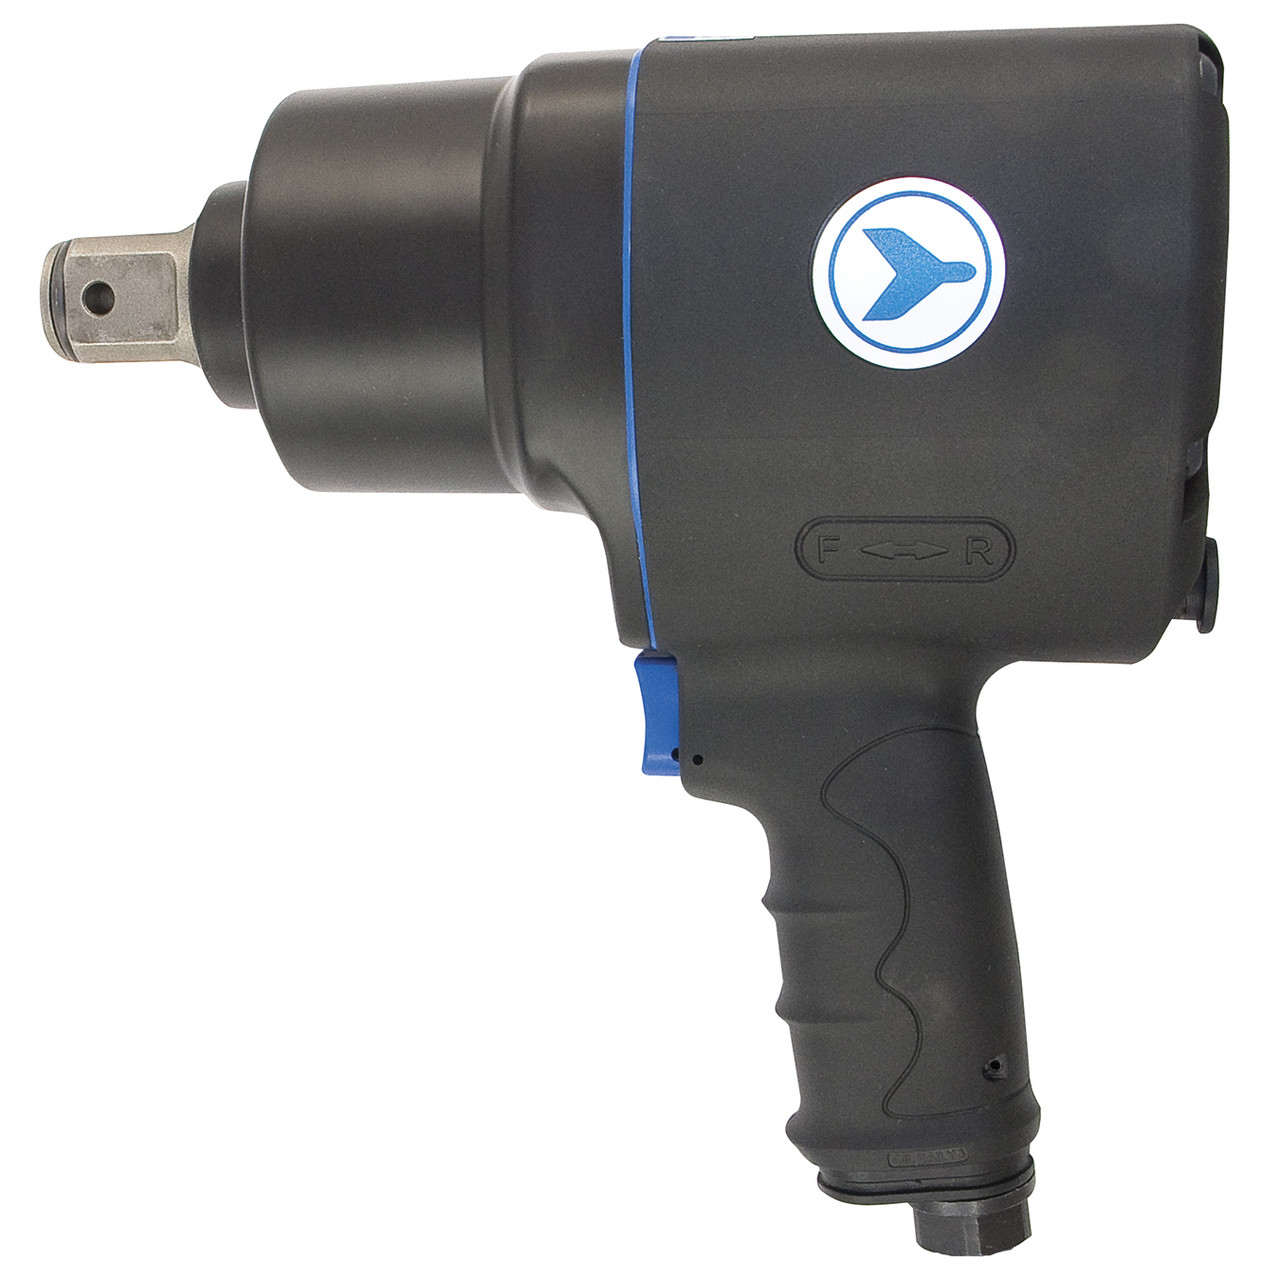 1" Drive SH/D Composite Impact Wrench  400424